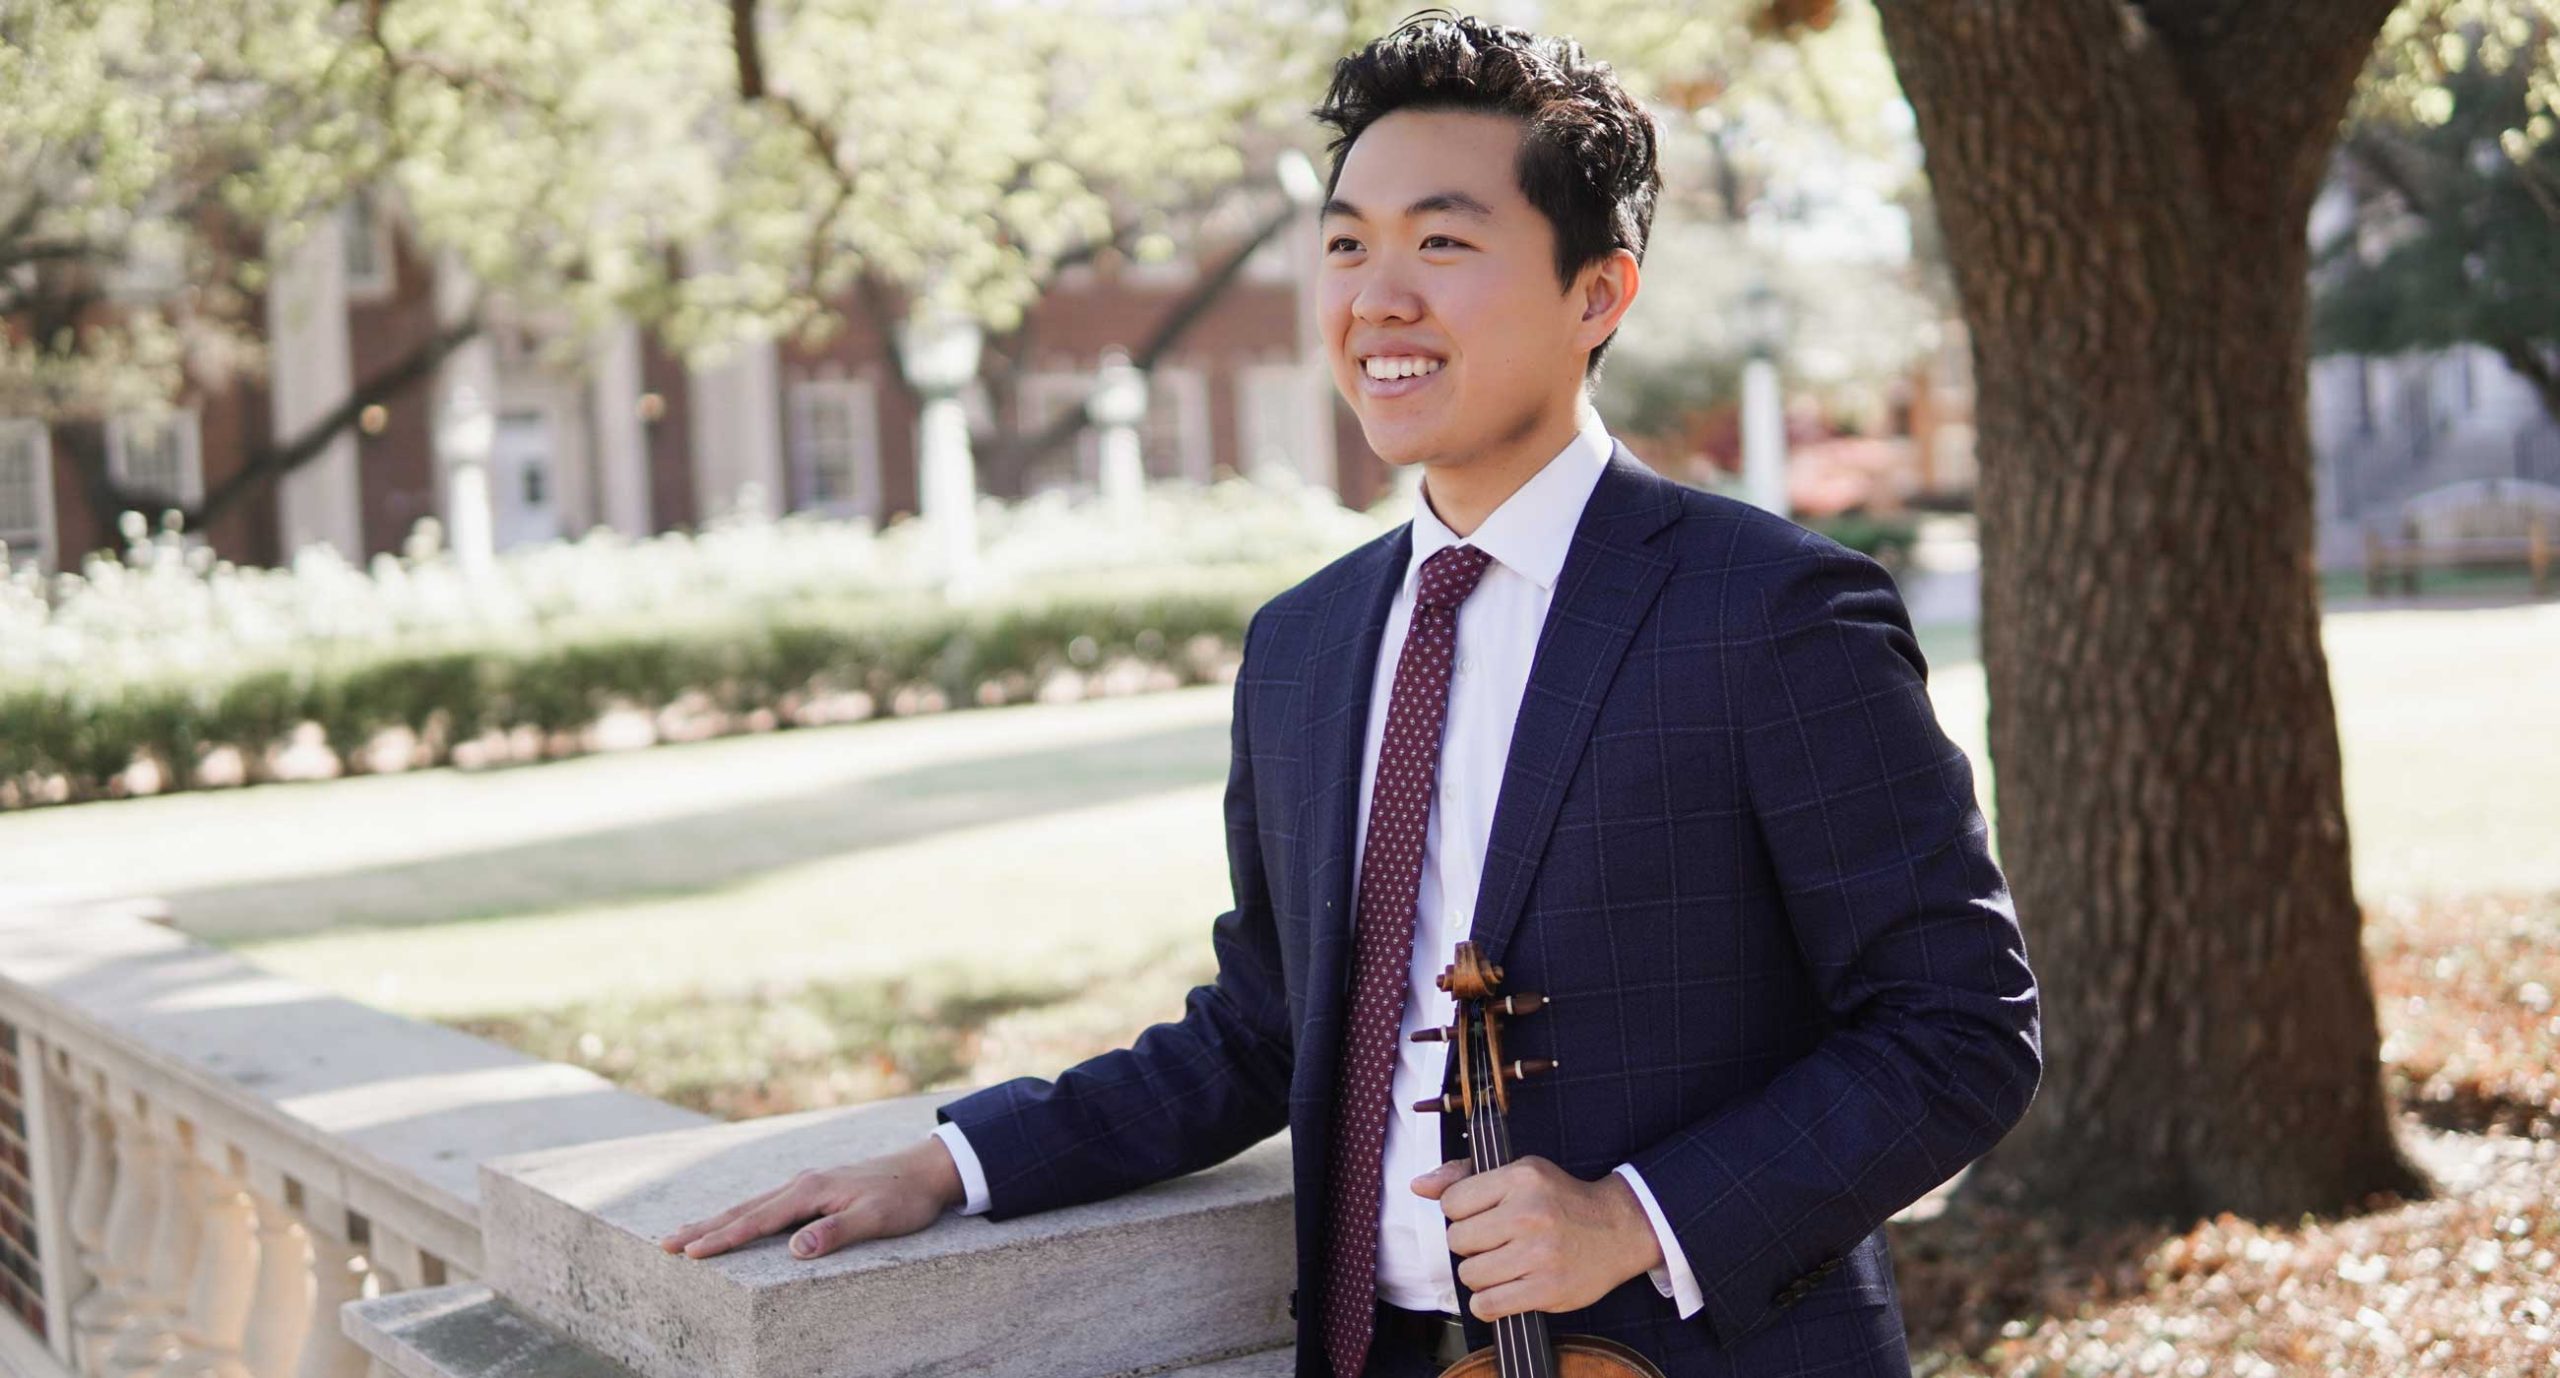 Hao Zhou wearing a suit holding a violin smiling